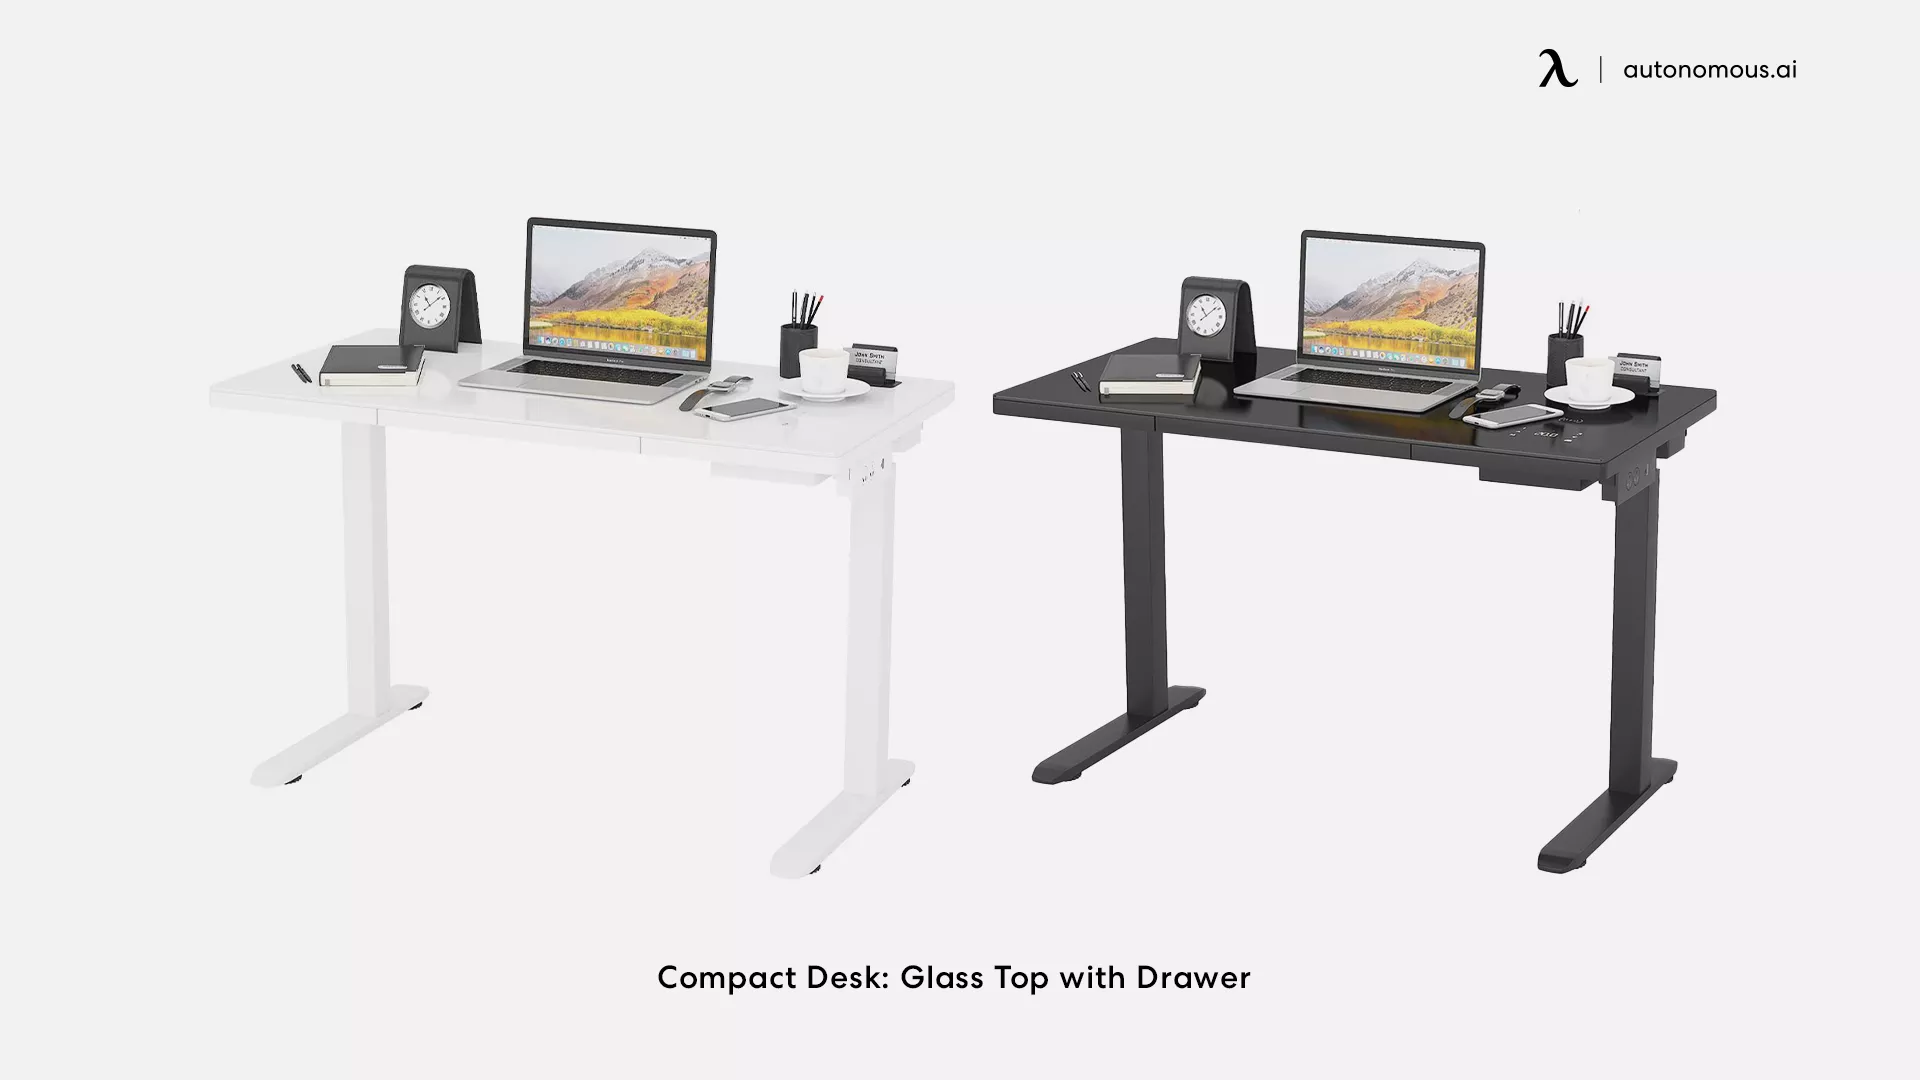 Compact Desk: Glass Top with Drawer